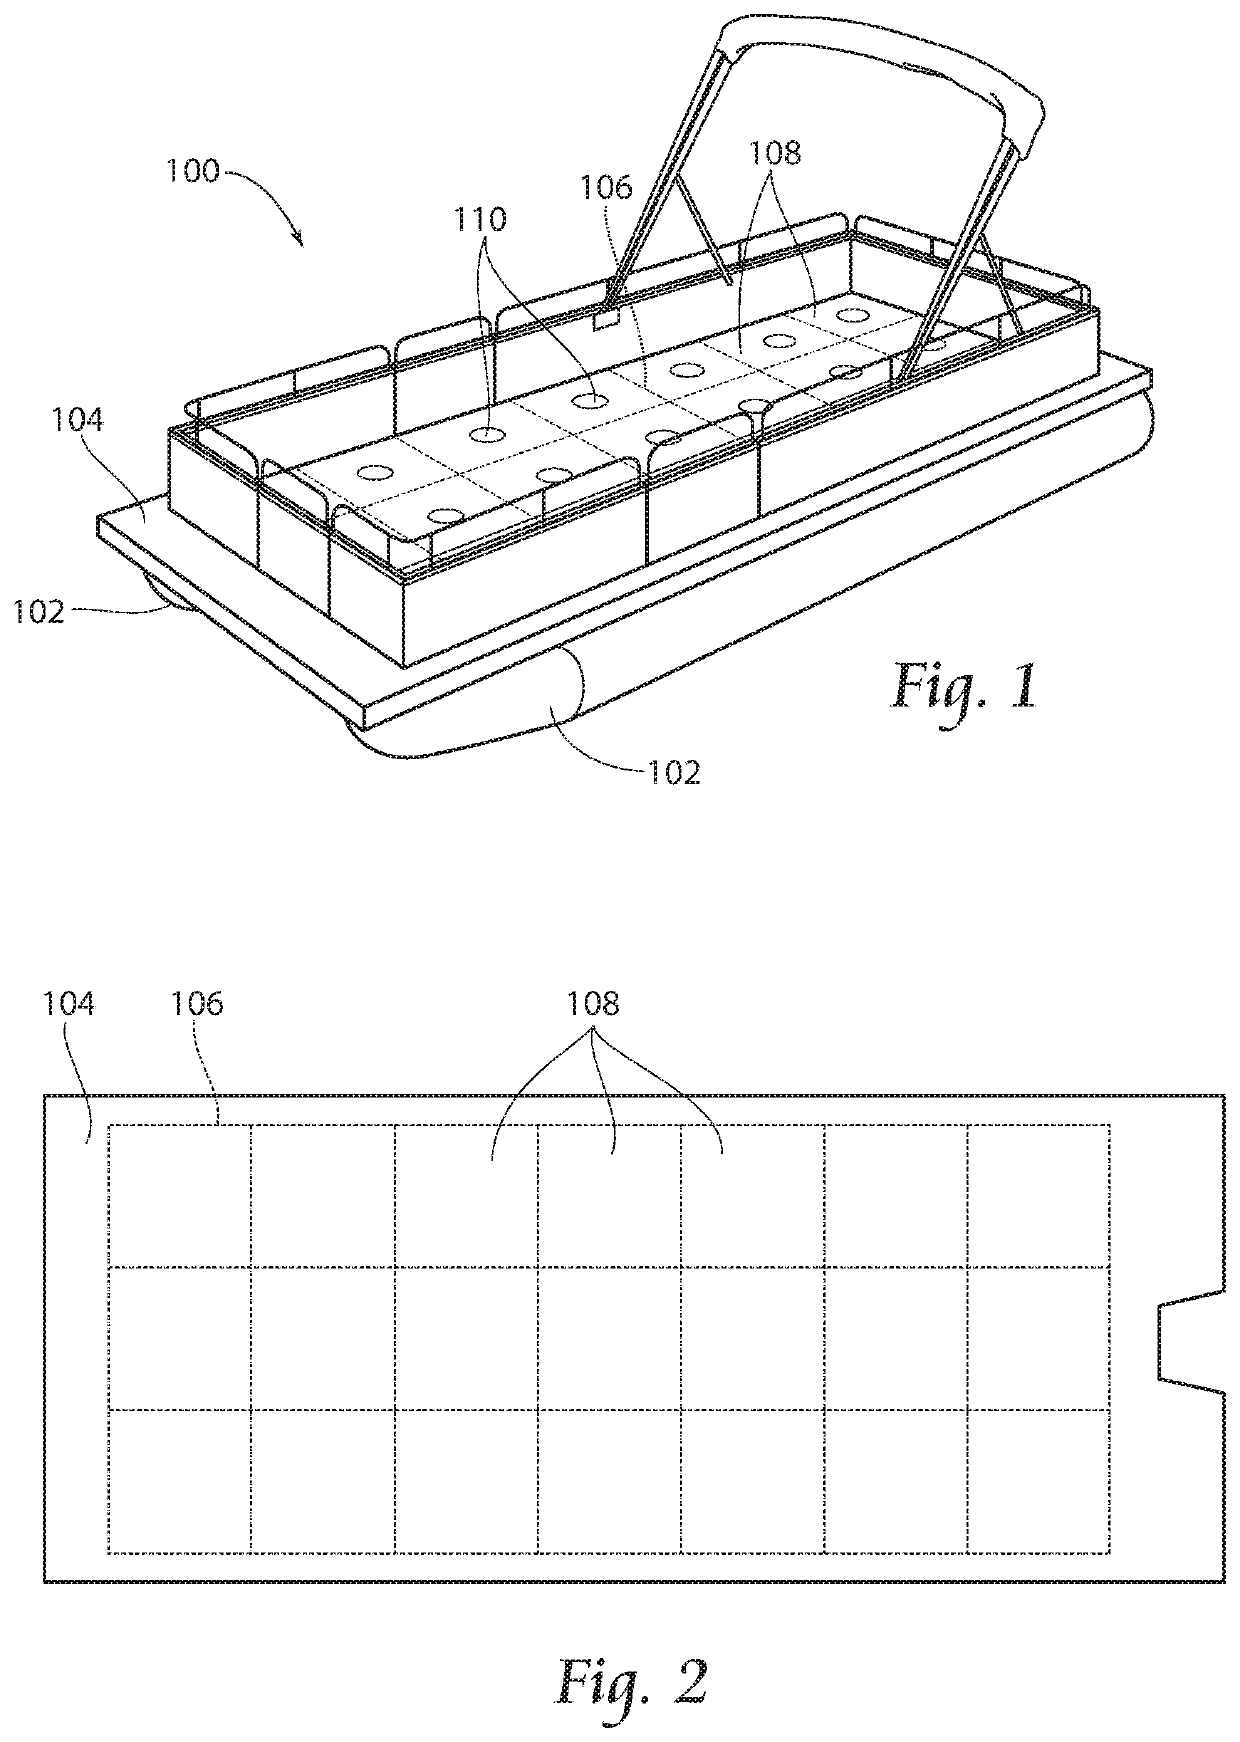 Method and apparatus for reconfigurable boat deck modules